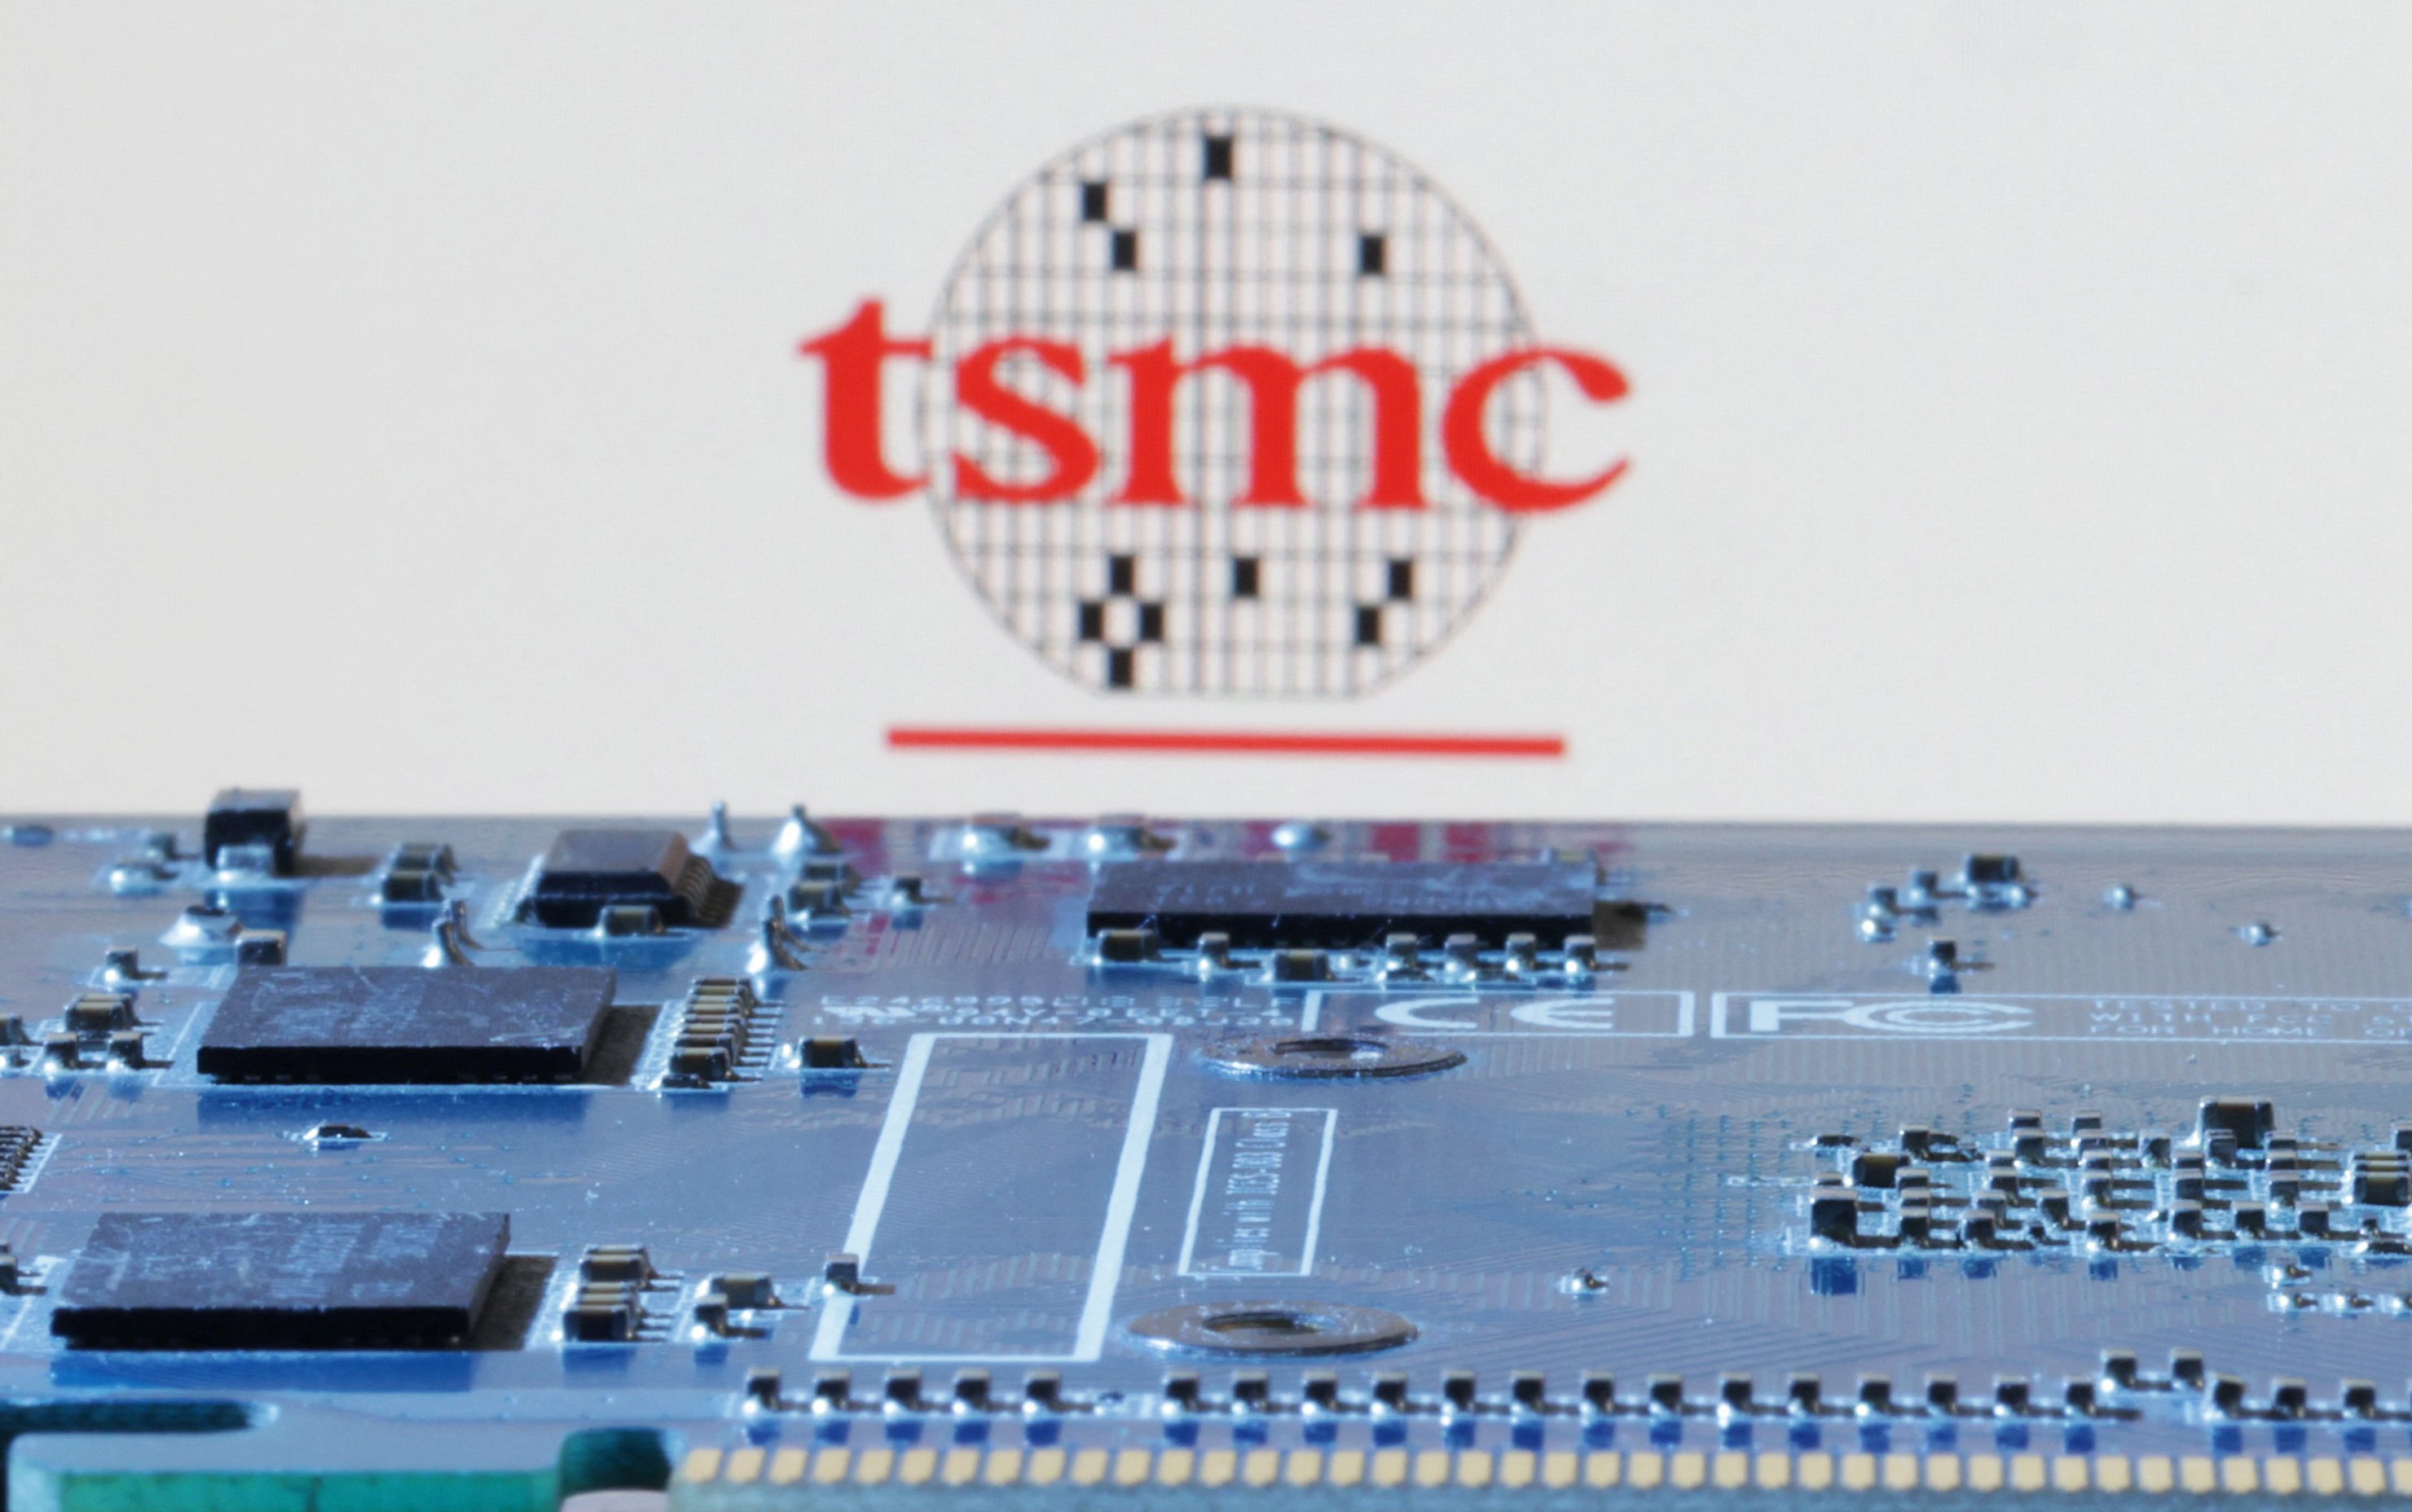 Taiwan Semiconductor Manufacturing Co expects revenue to grow in the low- to mid-20 per cent range this year. Image: Reuters